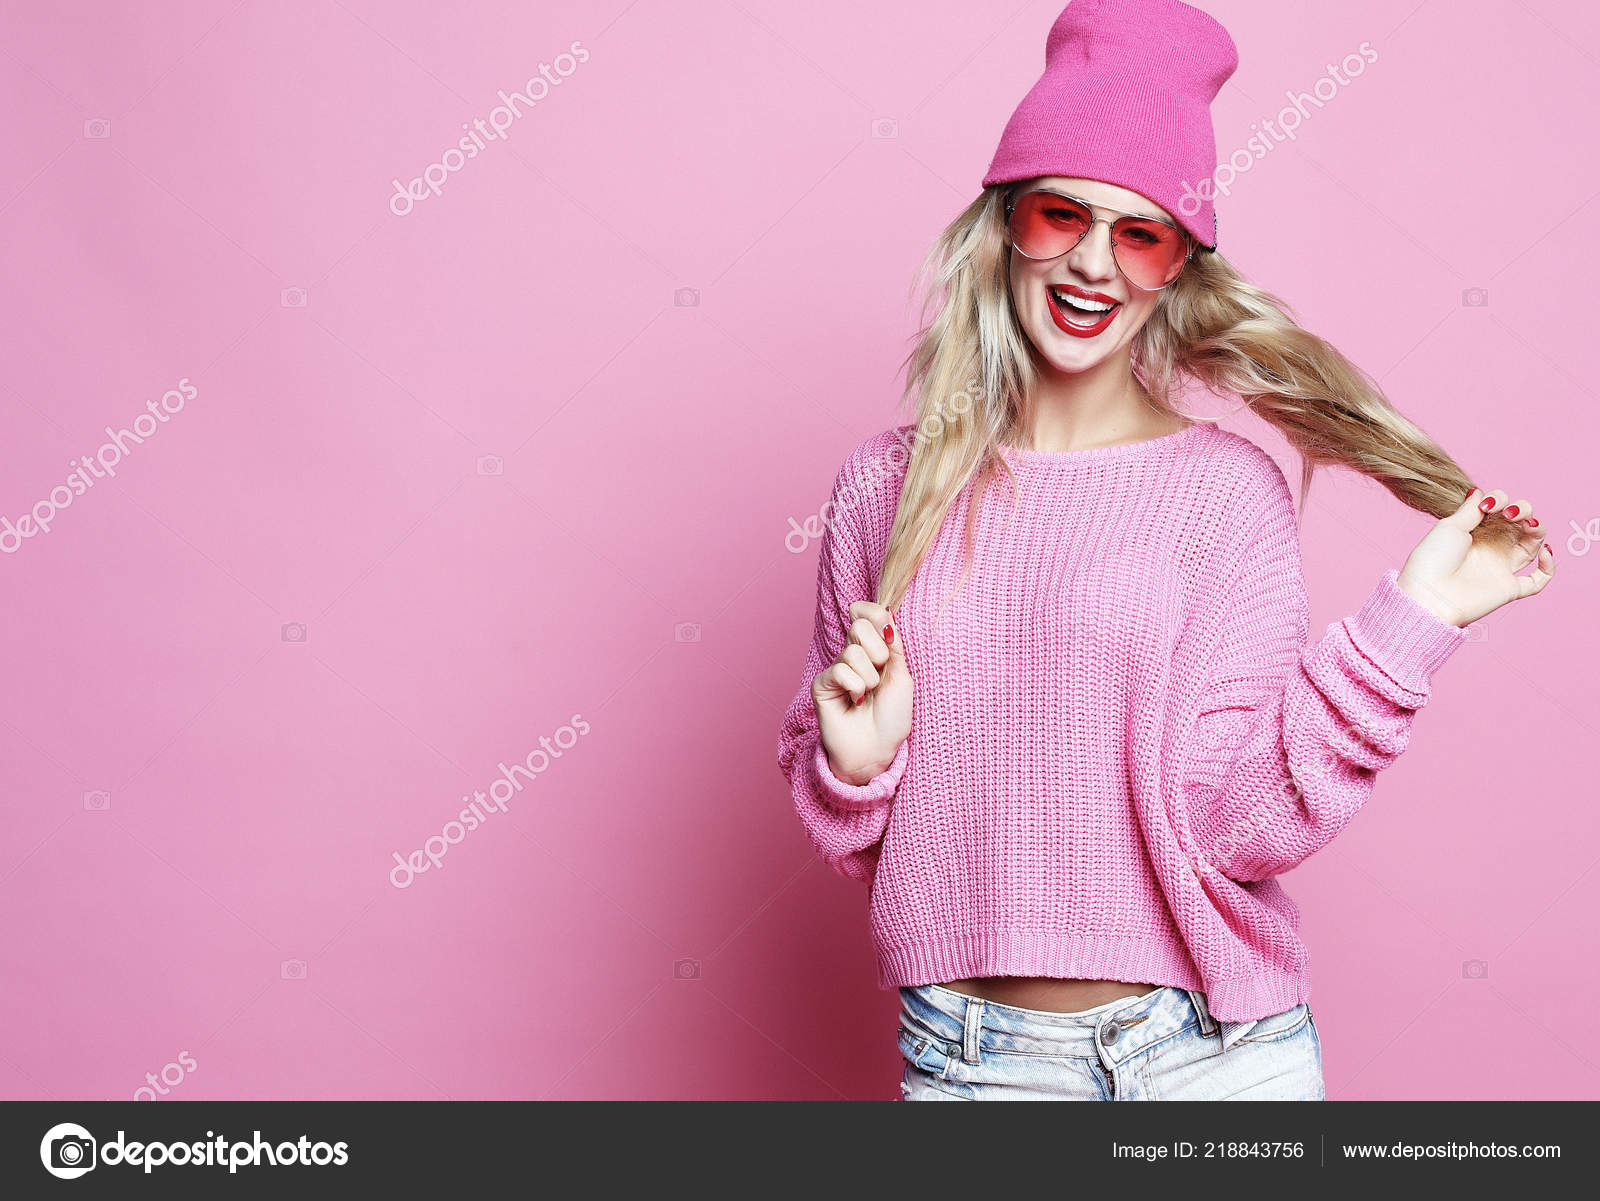 Stylish Fashion Portrait Of Trendy Casual Young Woman In Pink Pulover And Hat Posing Over Pink 